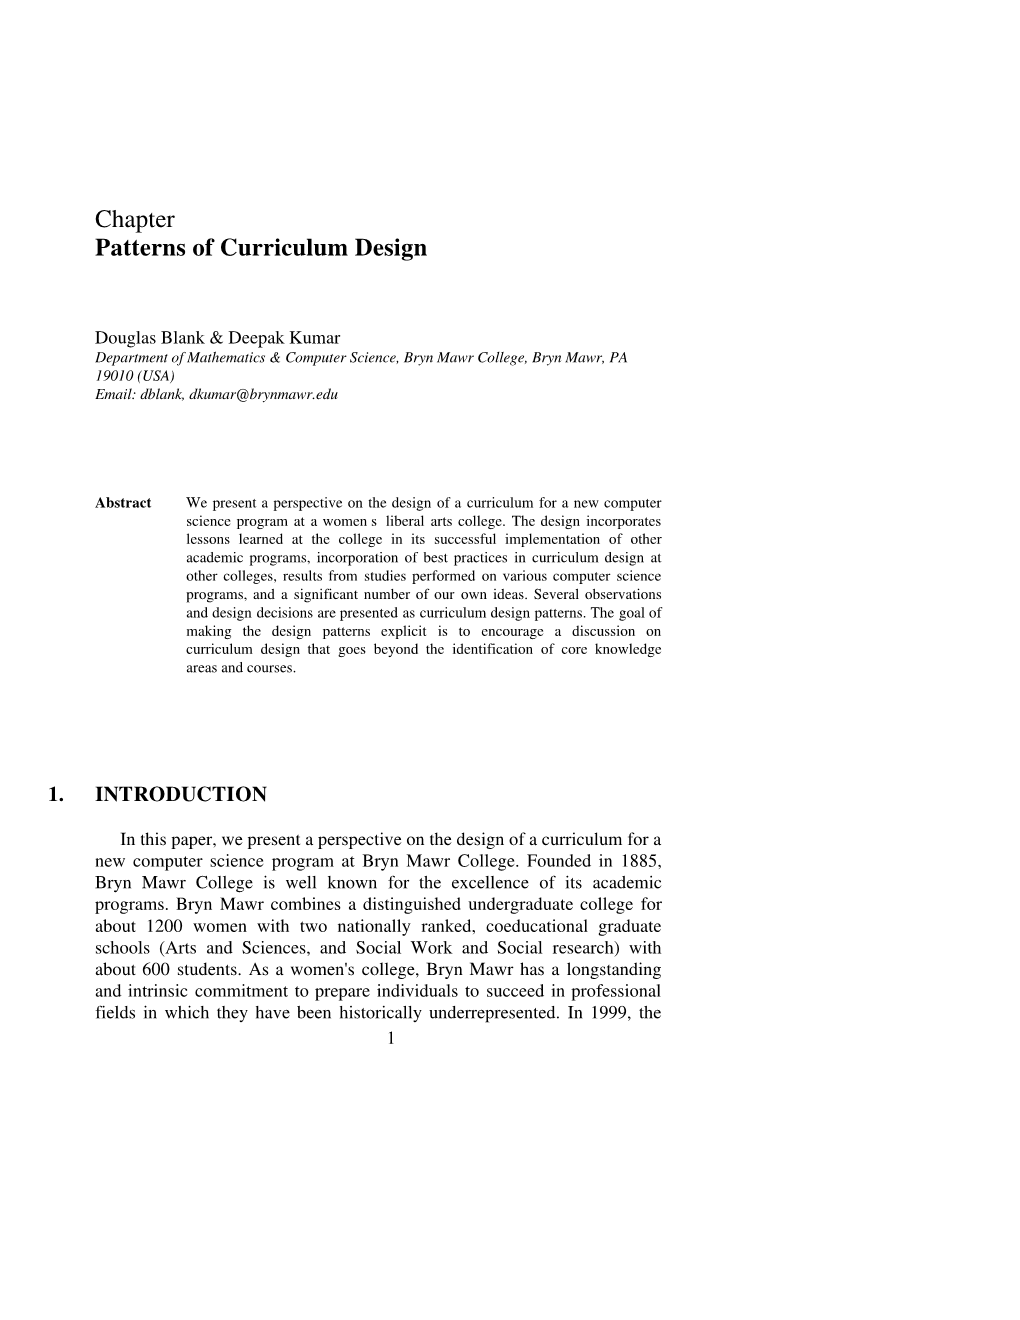 Chapter Patterns of Curriculum Design